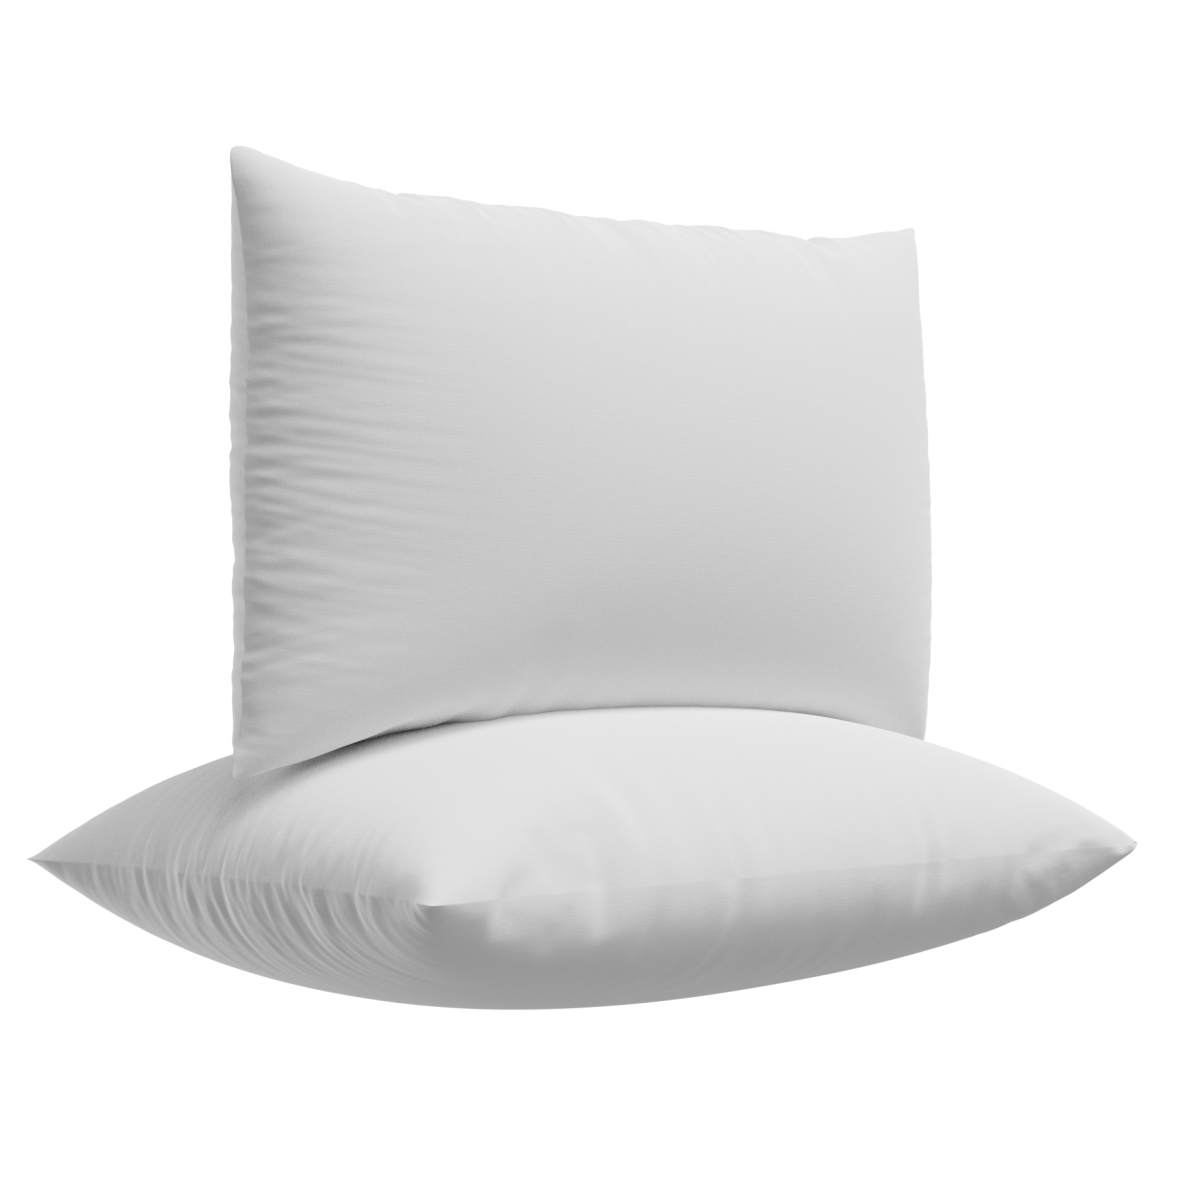 Utopia Bedding Throw Pillows Insert (Pack of 4, White) - 12 x 12 Inches Bed  and couch Pillows - Indoor Decorative Pillows